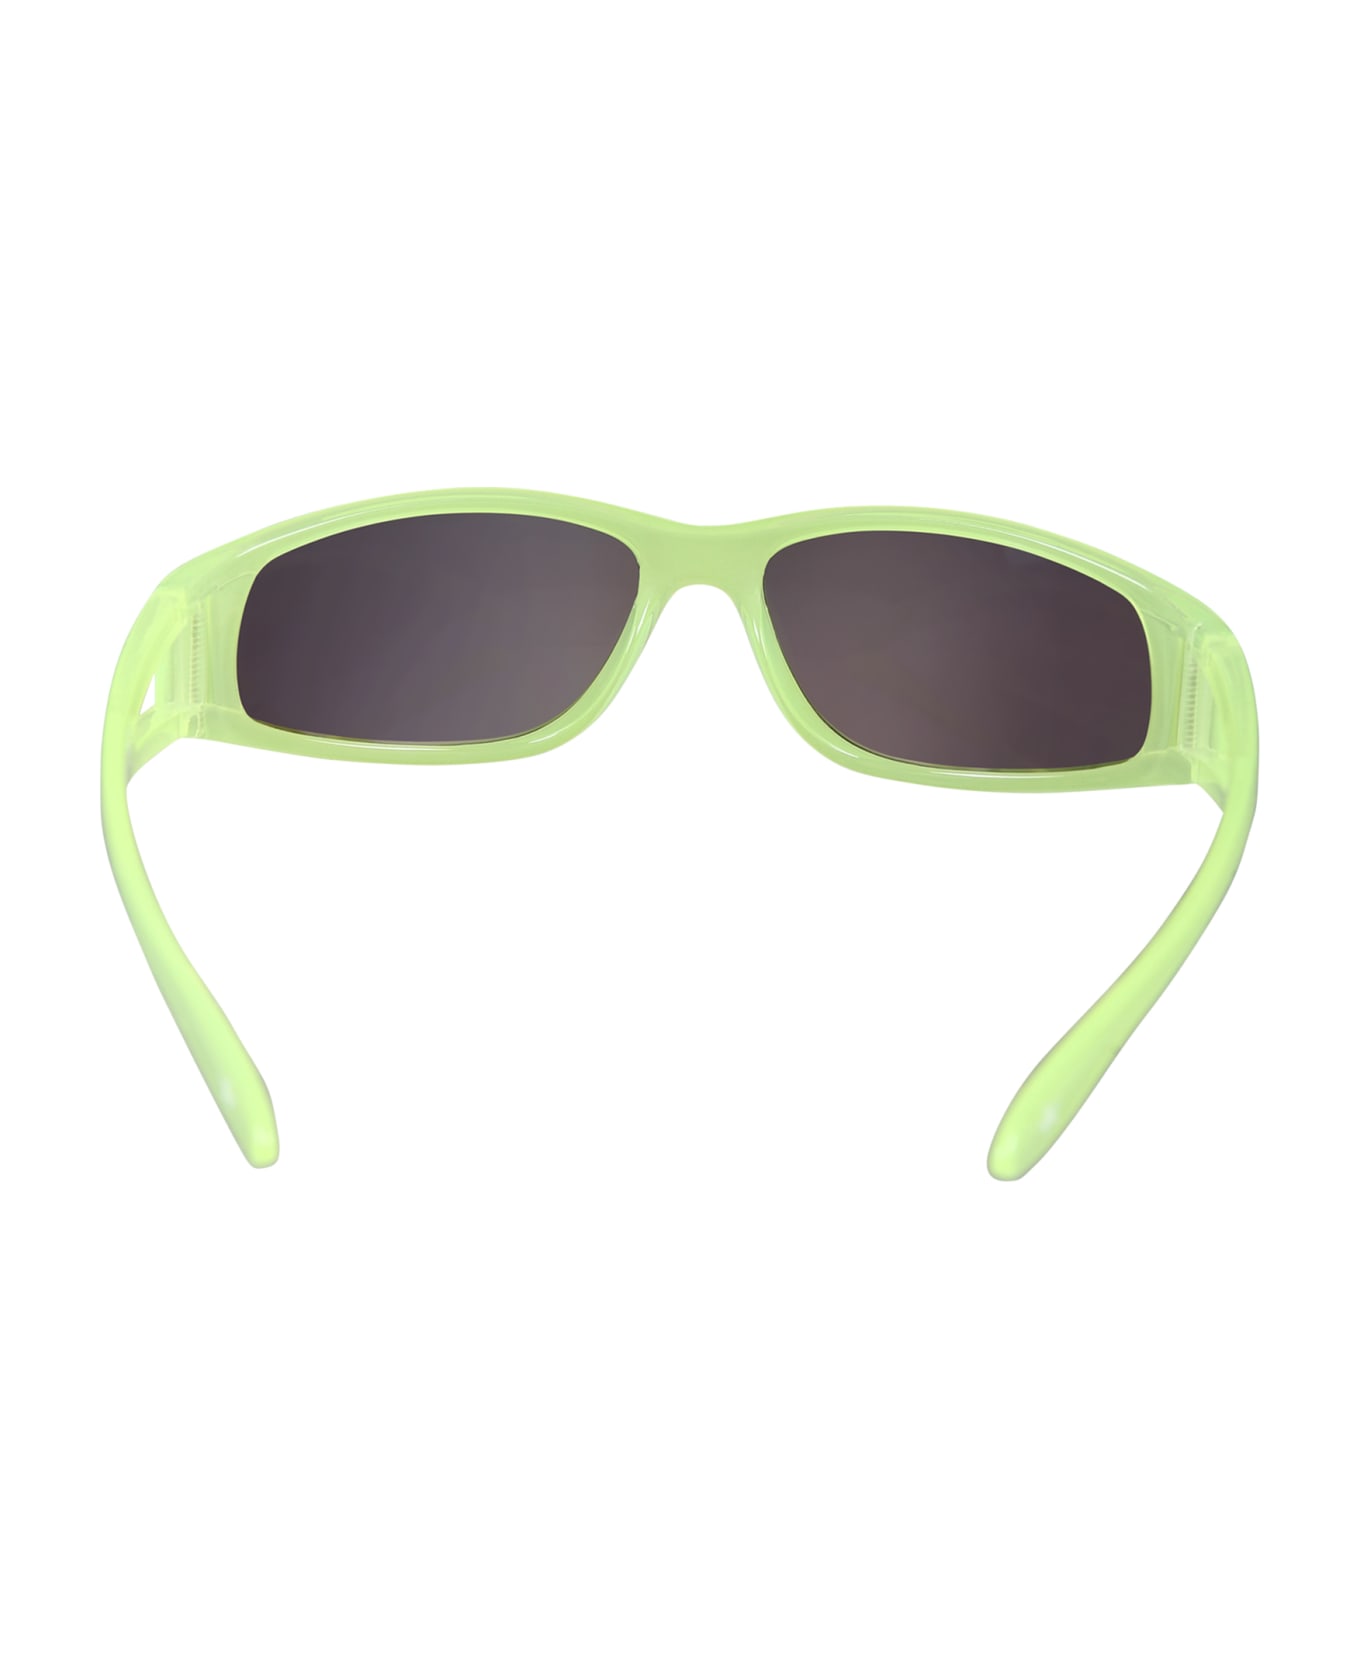 Molo Fluorescent Yellow Soso Sunglasses For Kids - Green アクセサリー＆ギフト